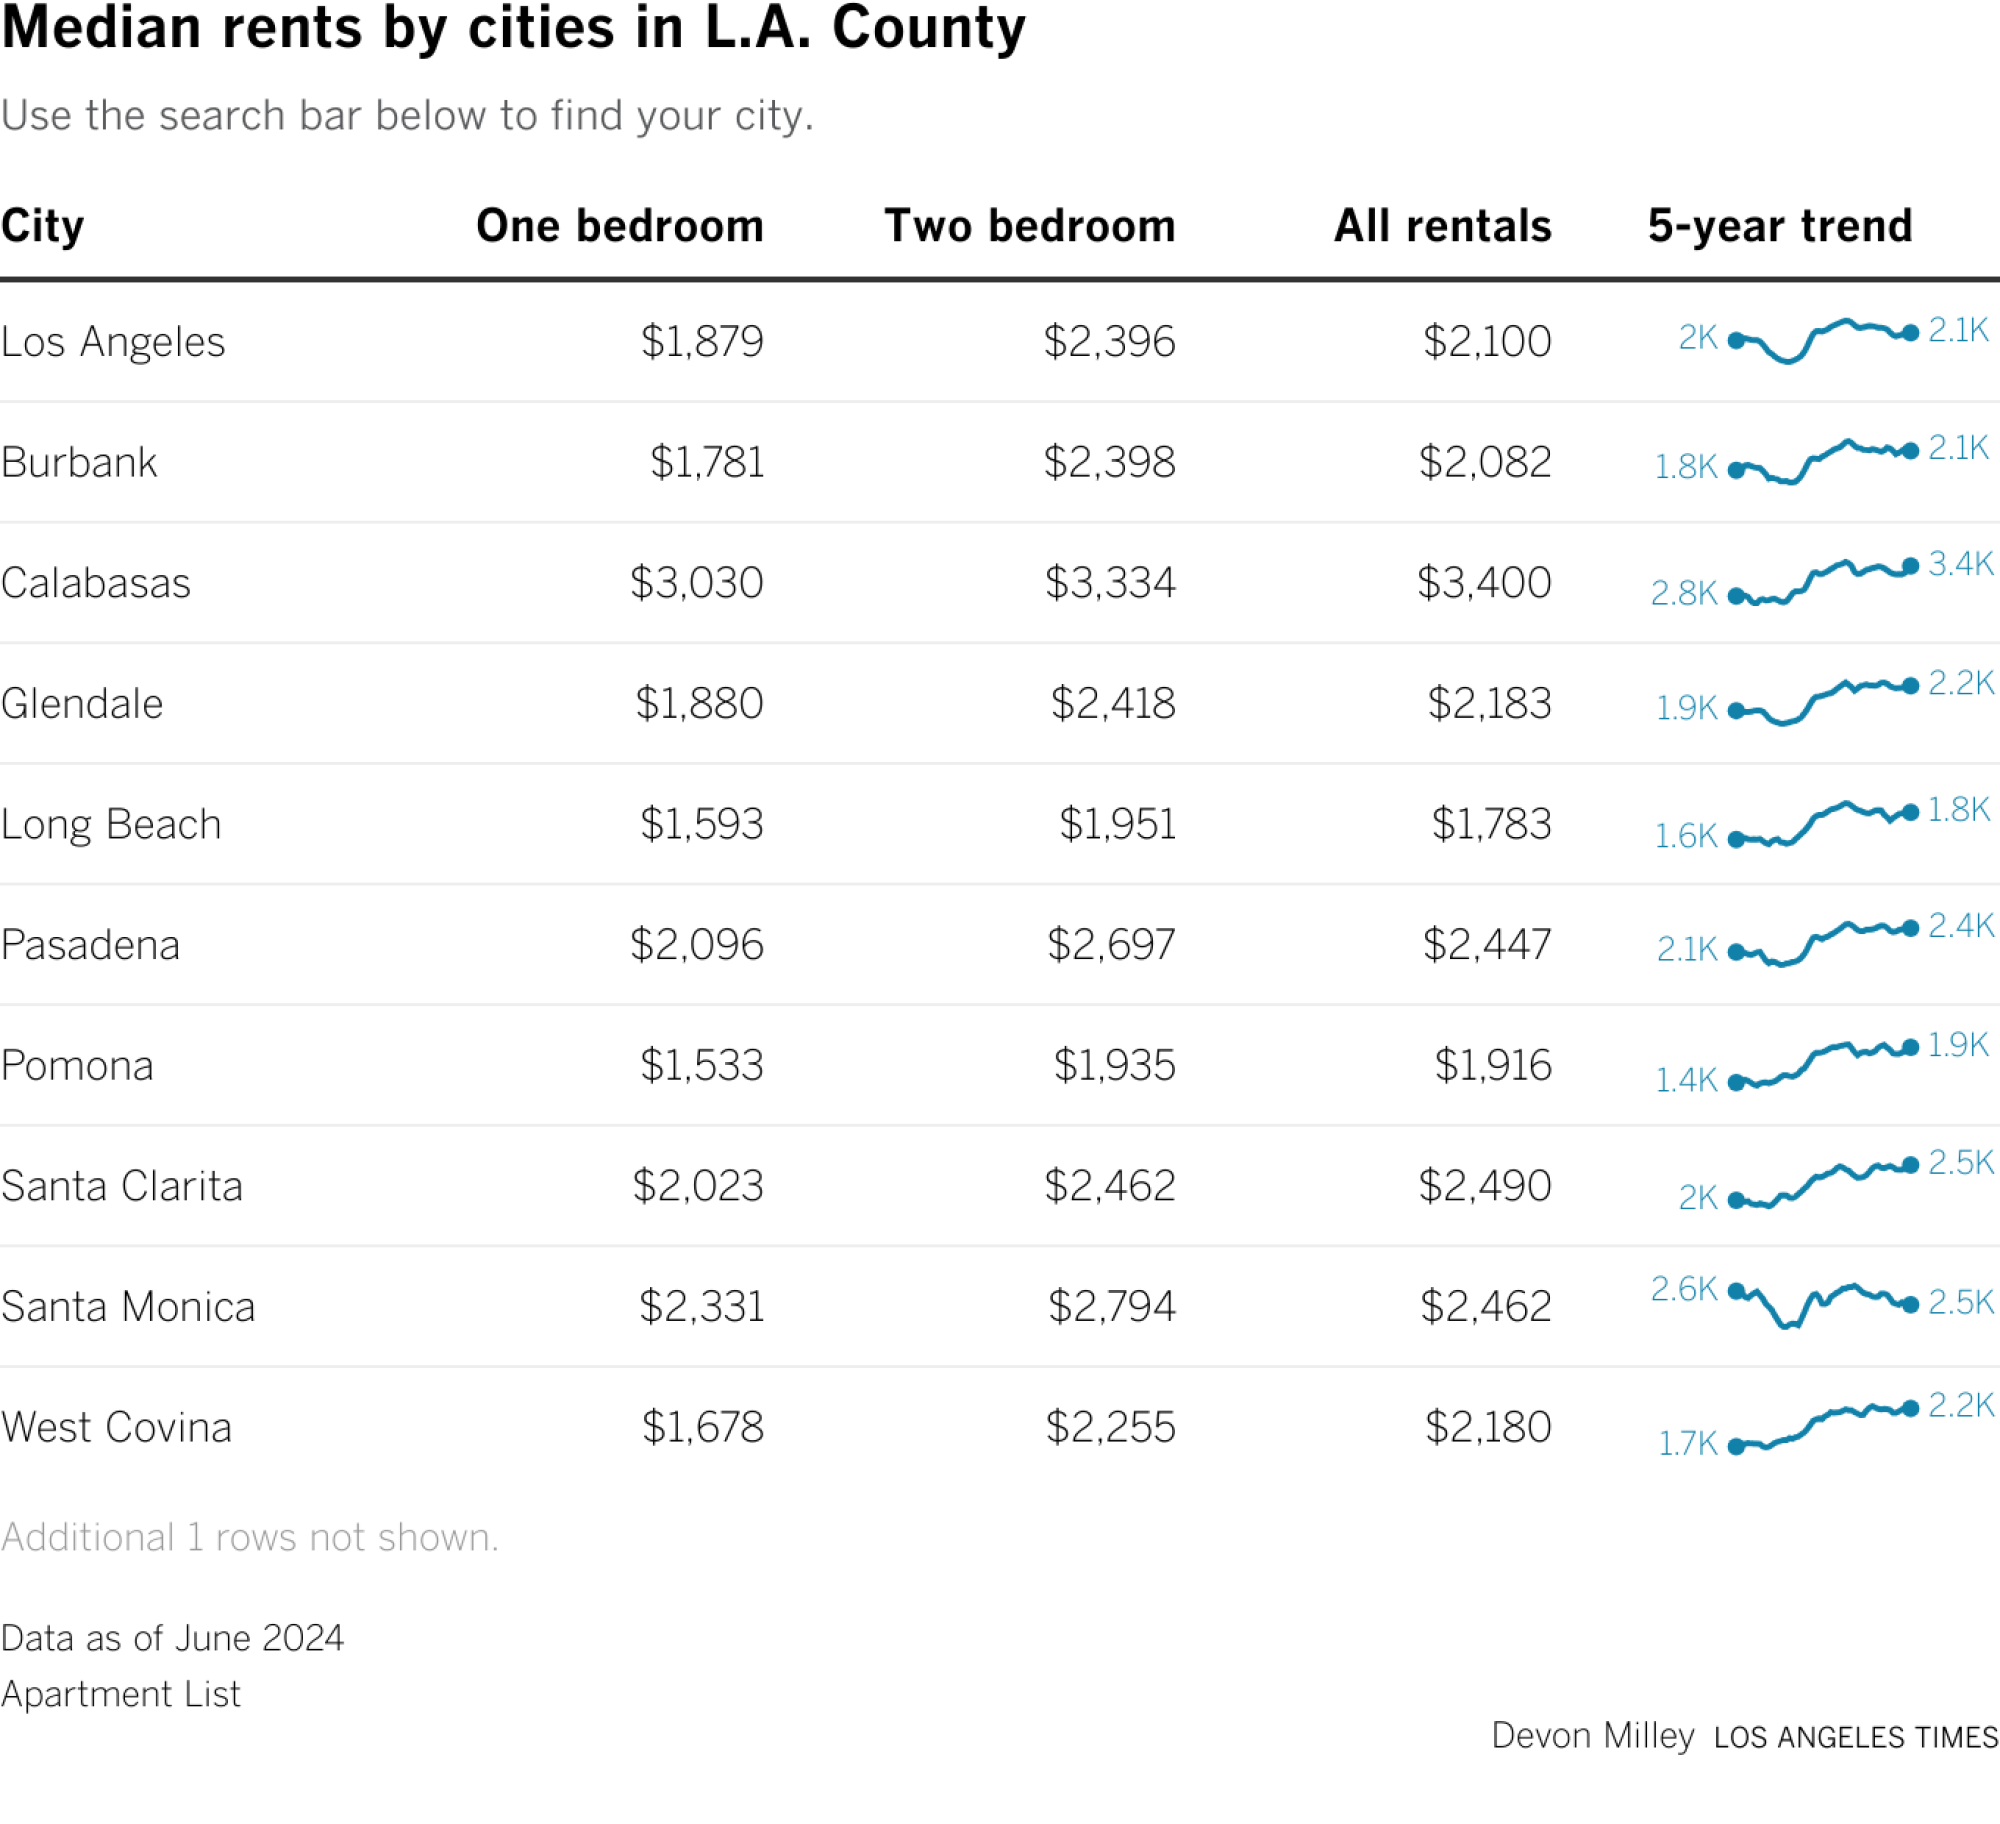 Table of apartment rental prices for cities in Los Angeles County